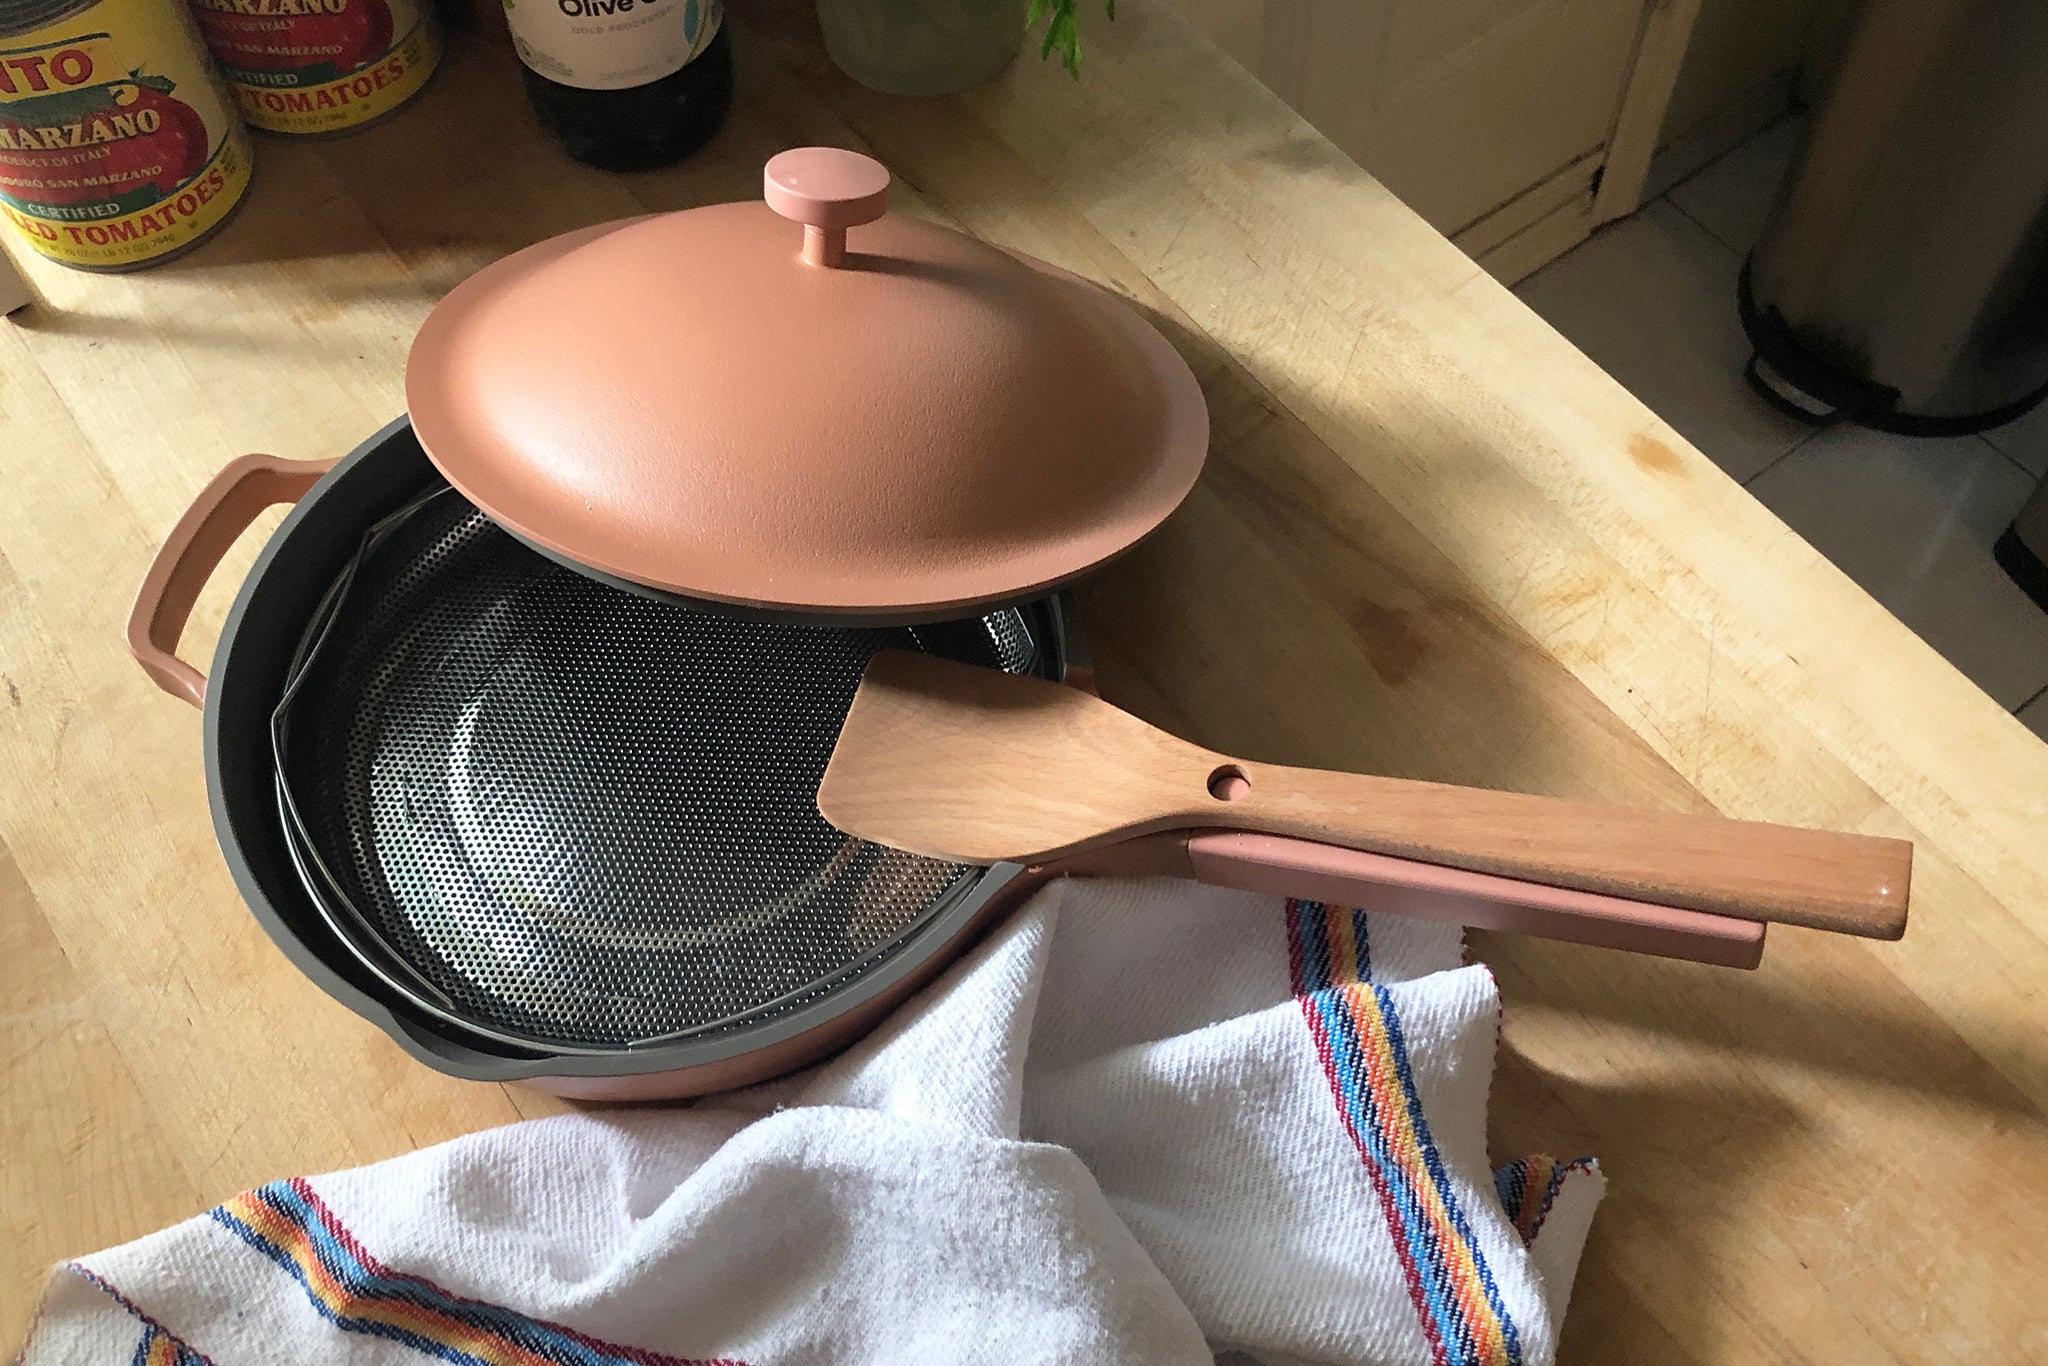 The Instafamous Always Pan Is Not Worth the Hype | Reviews by Wirecutter